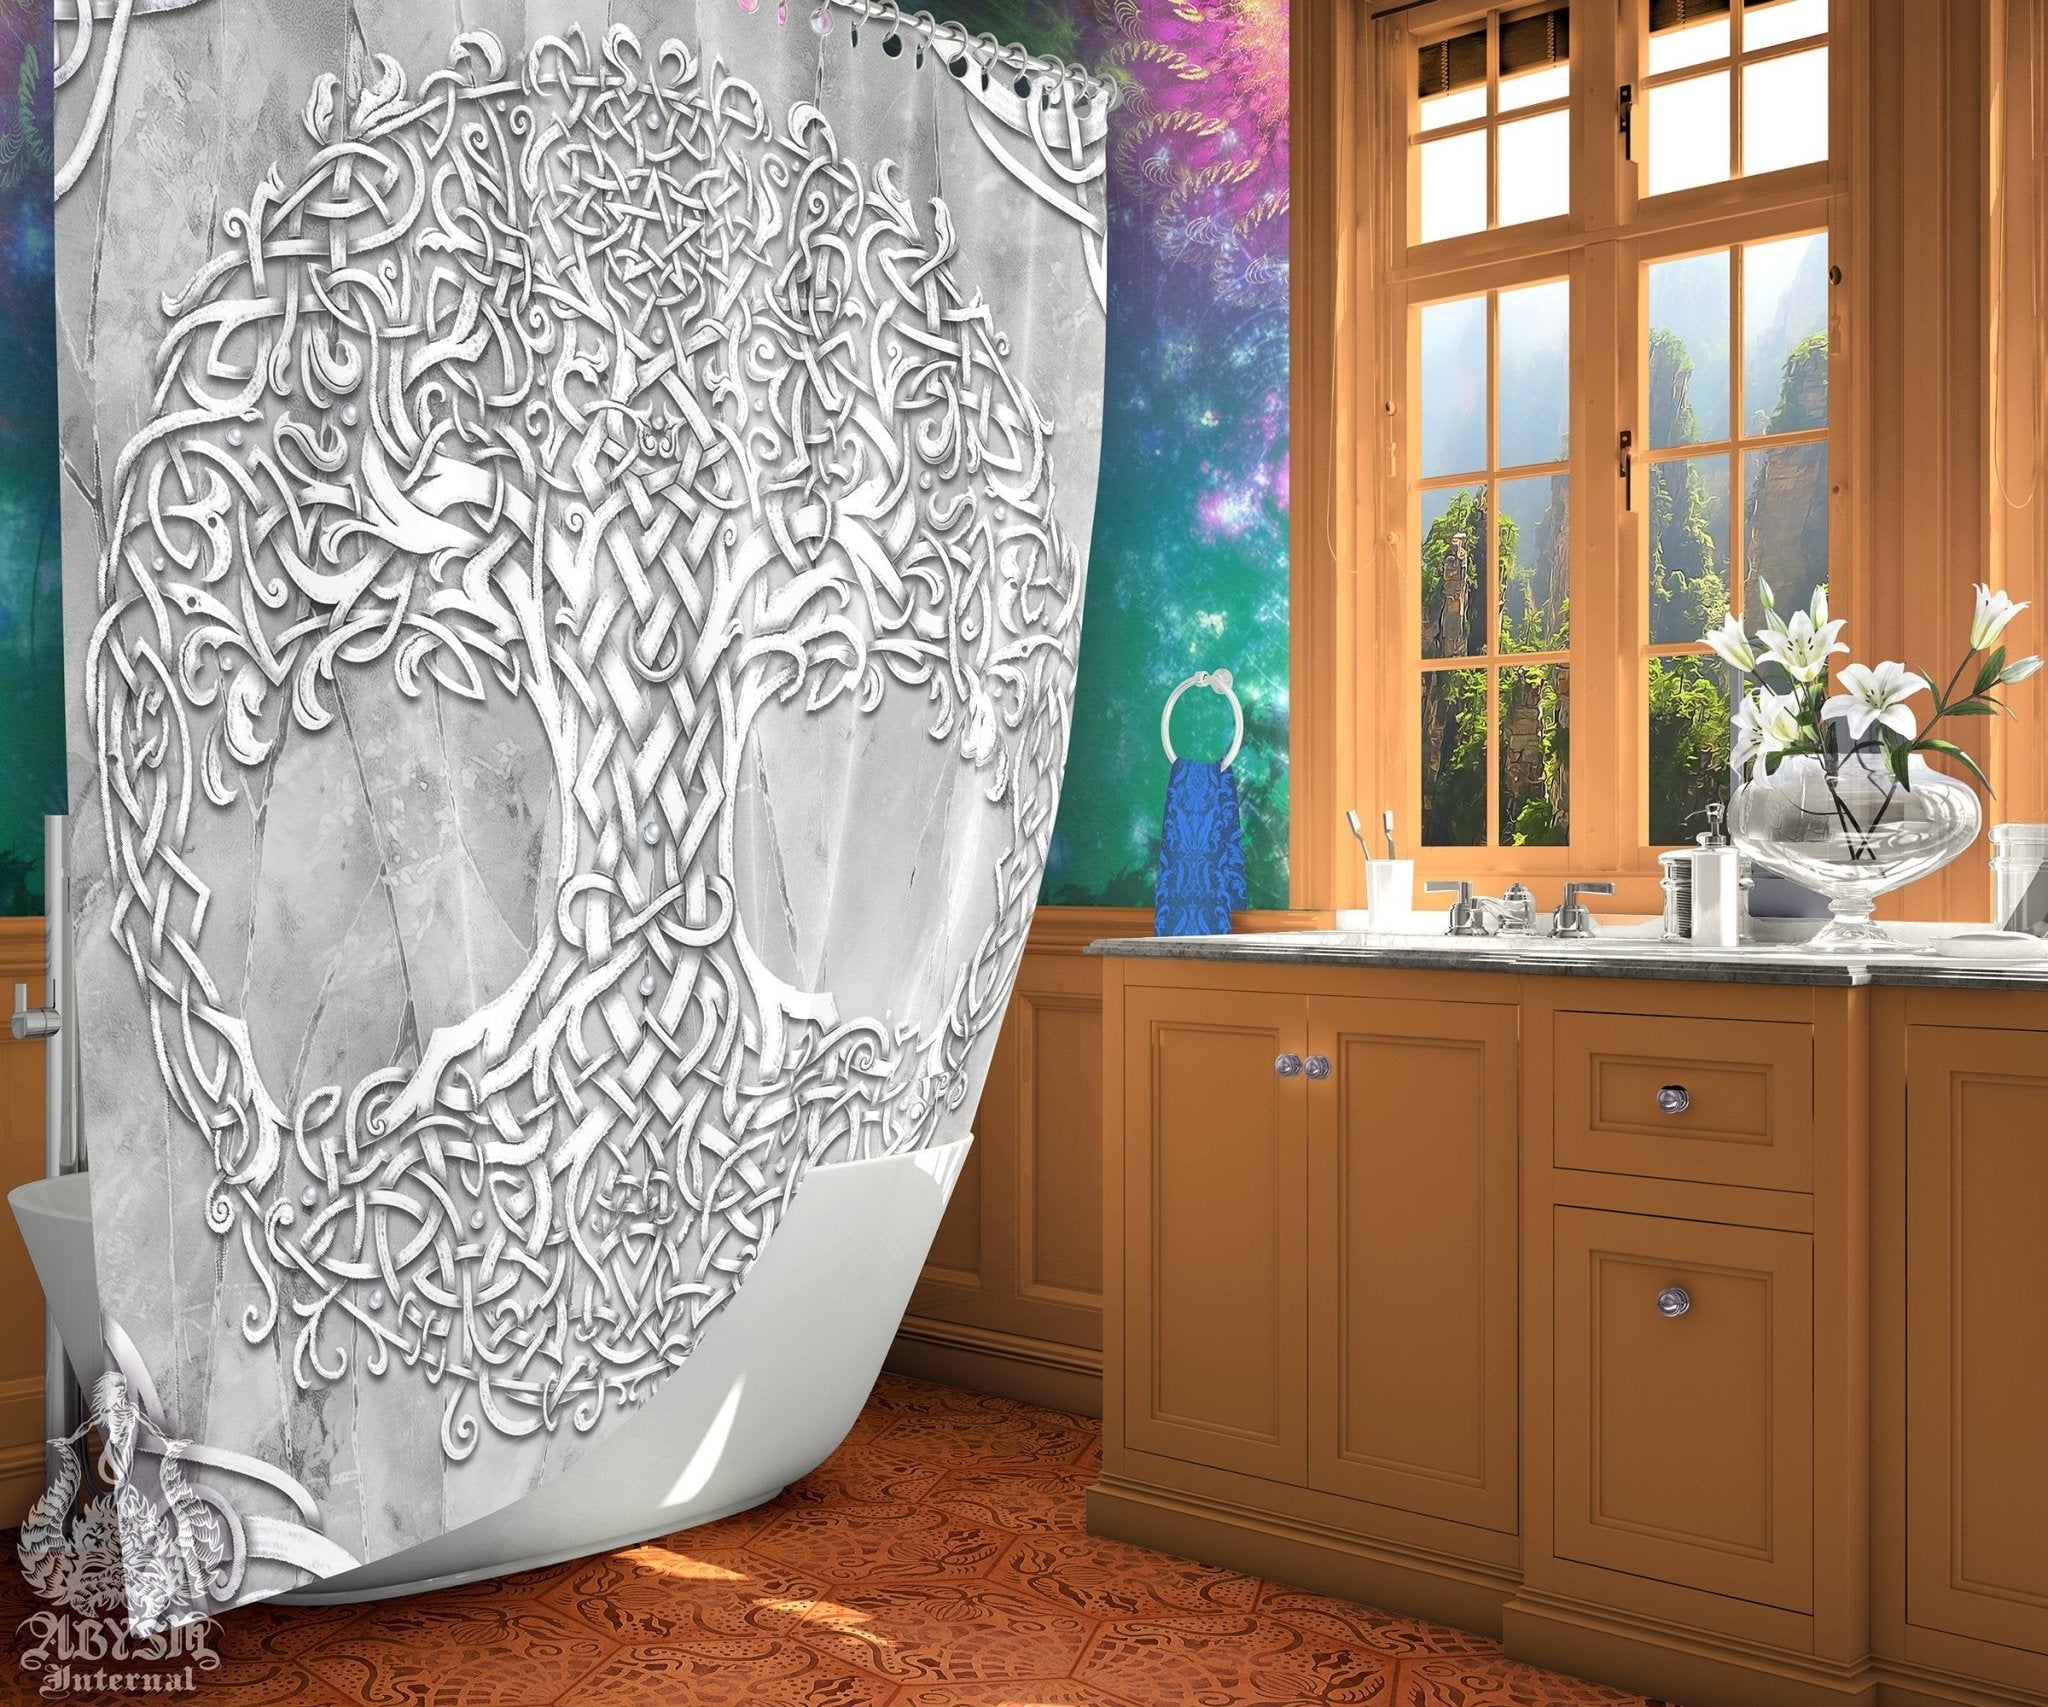 Pagan Shower Curtain, Boho Bathroom Decor, Tree of Life, Celtic Knot, Eclectic and Funky Home - Stone - Abysm Internal